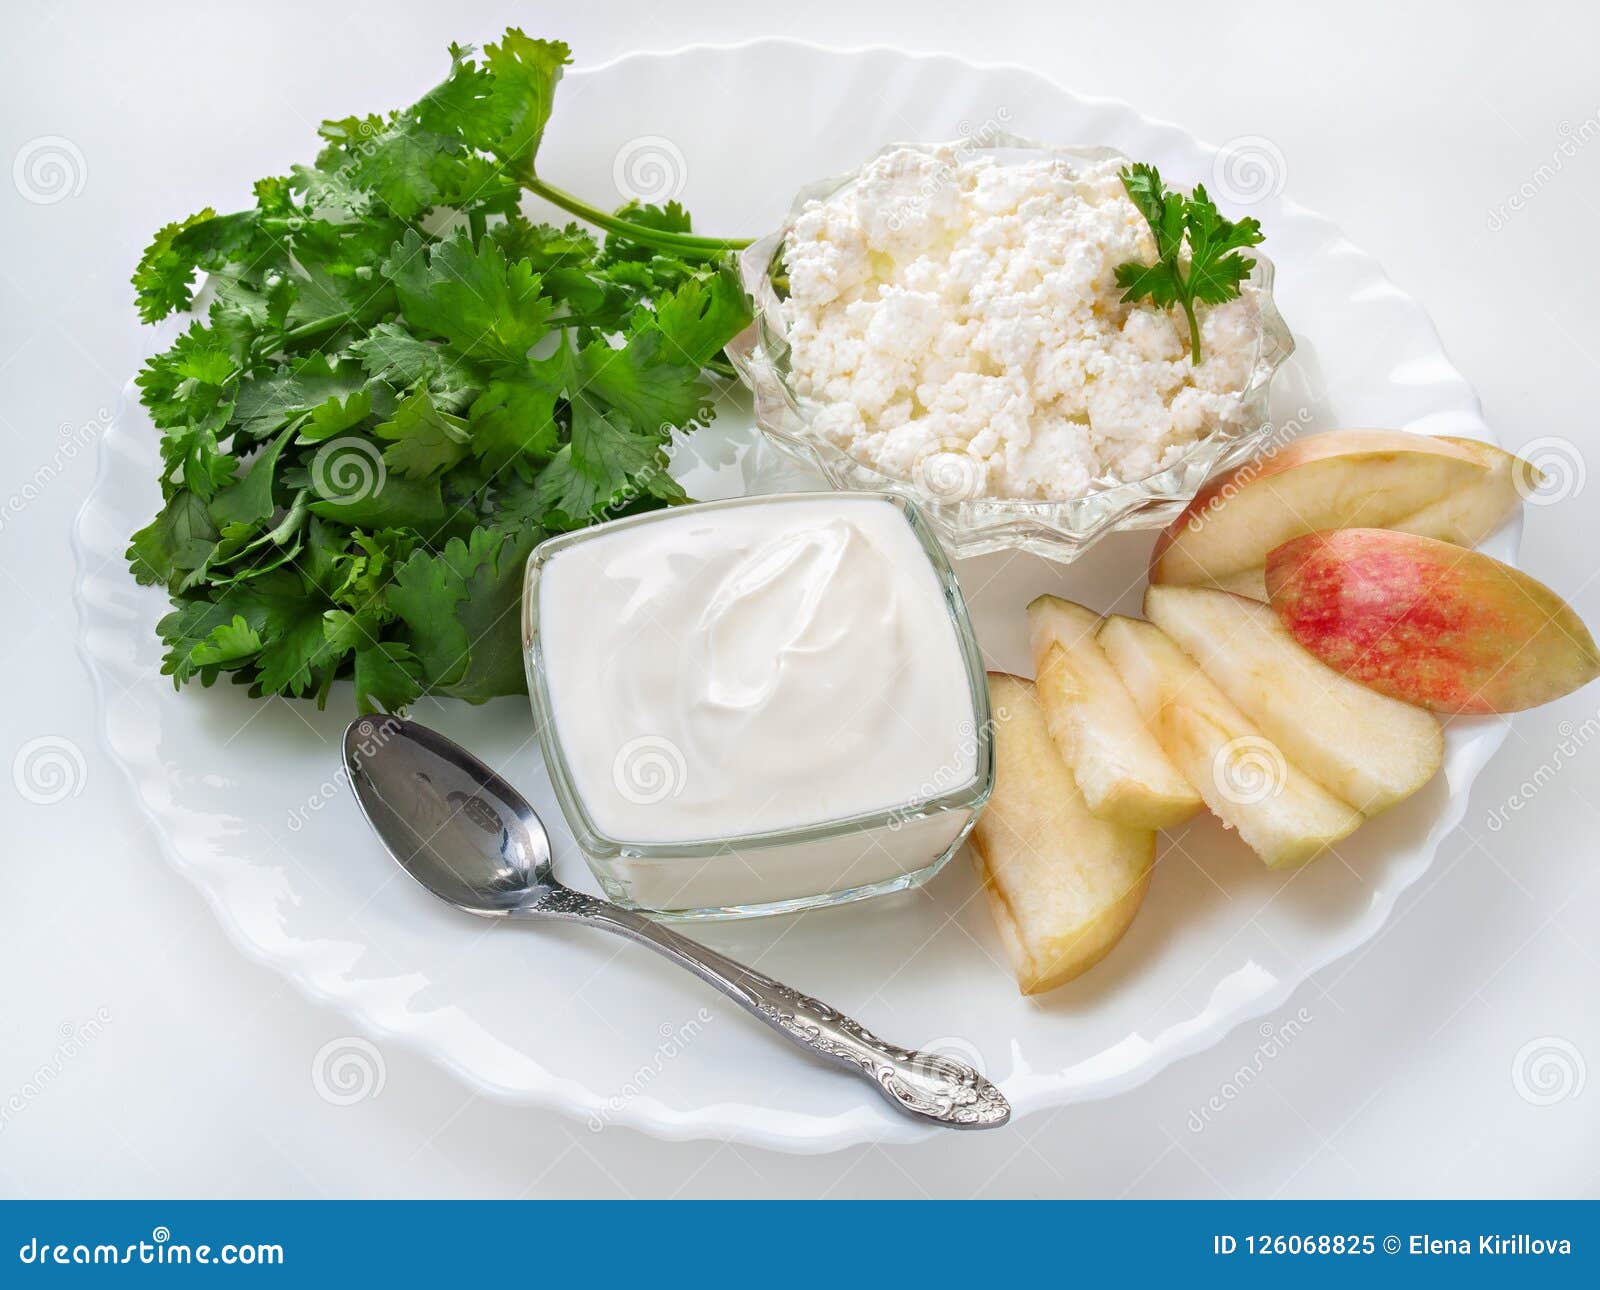 Cottage Cheese Sour Cream Cilantro Slices Of Apple On A White